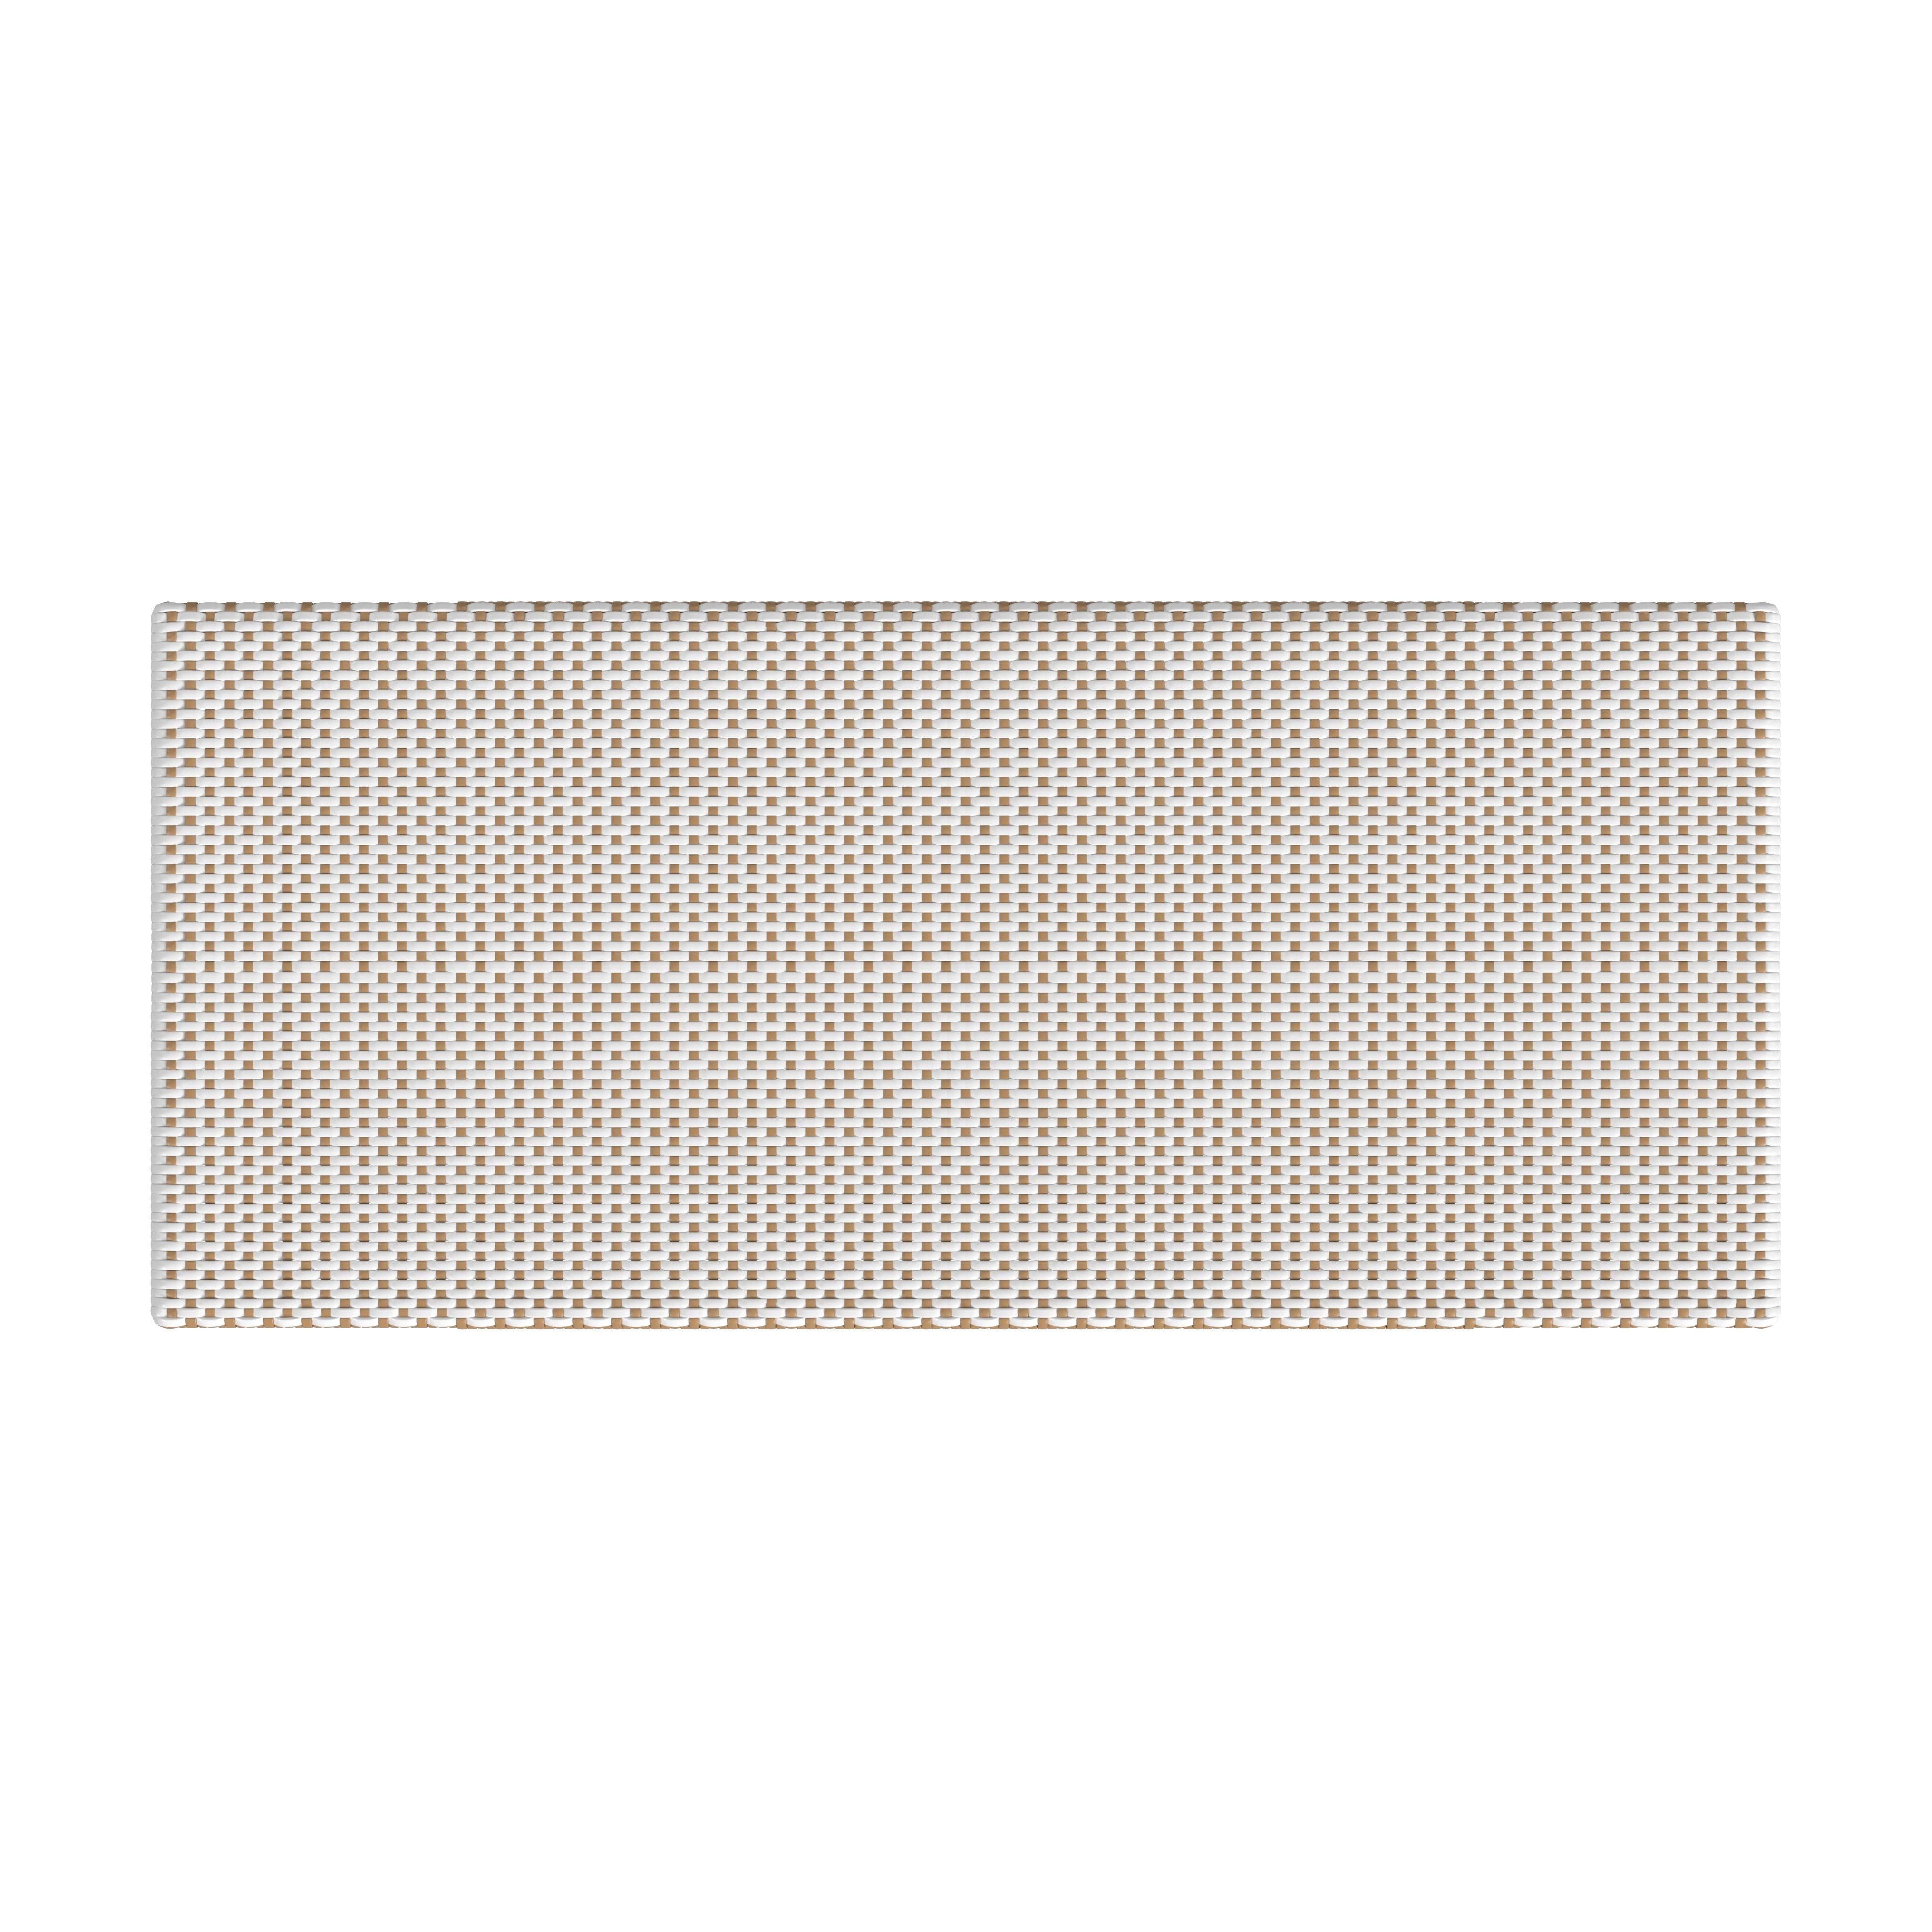 Tobias Beige and White Outdoor Bench - Image 1